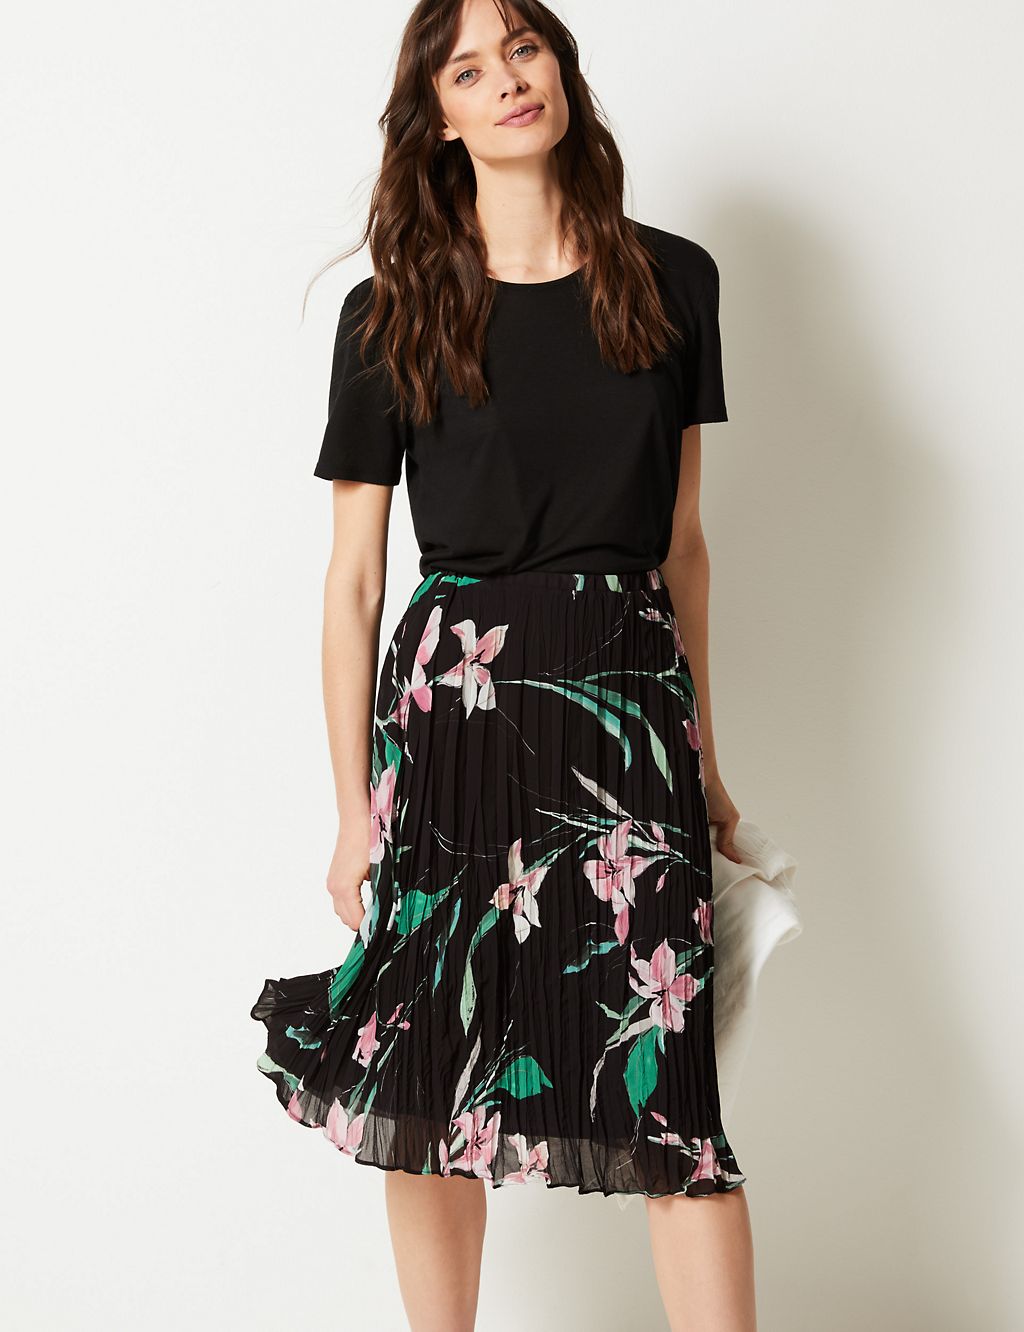 Floral Print Fit & Flare Skirt 3 of 4